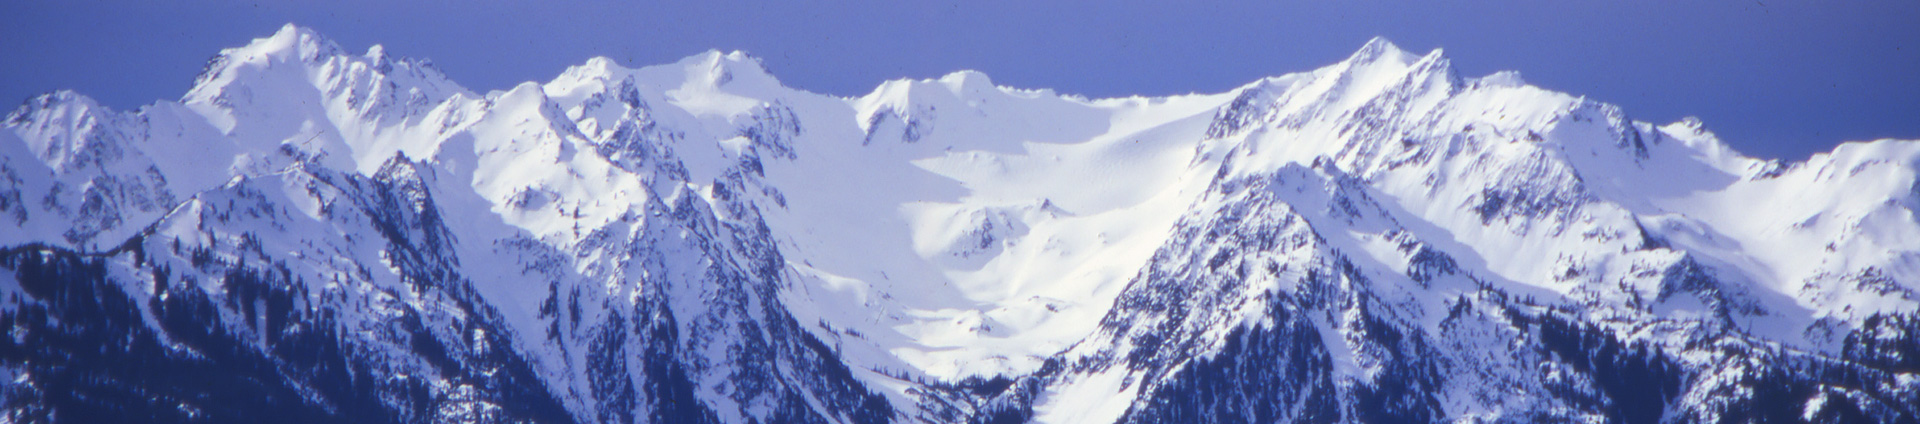 header image of Olympic mountains in snow